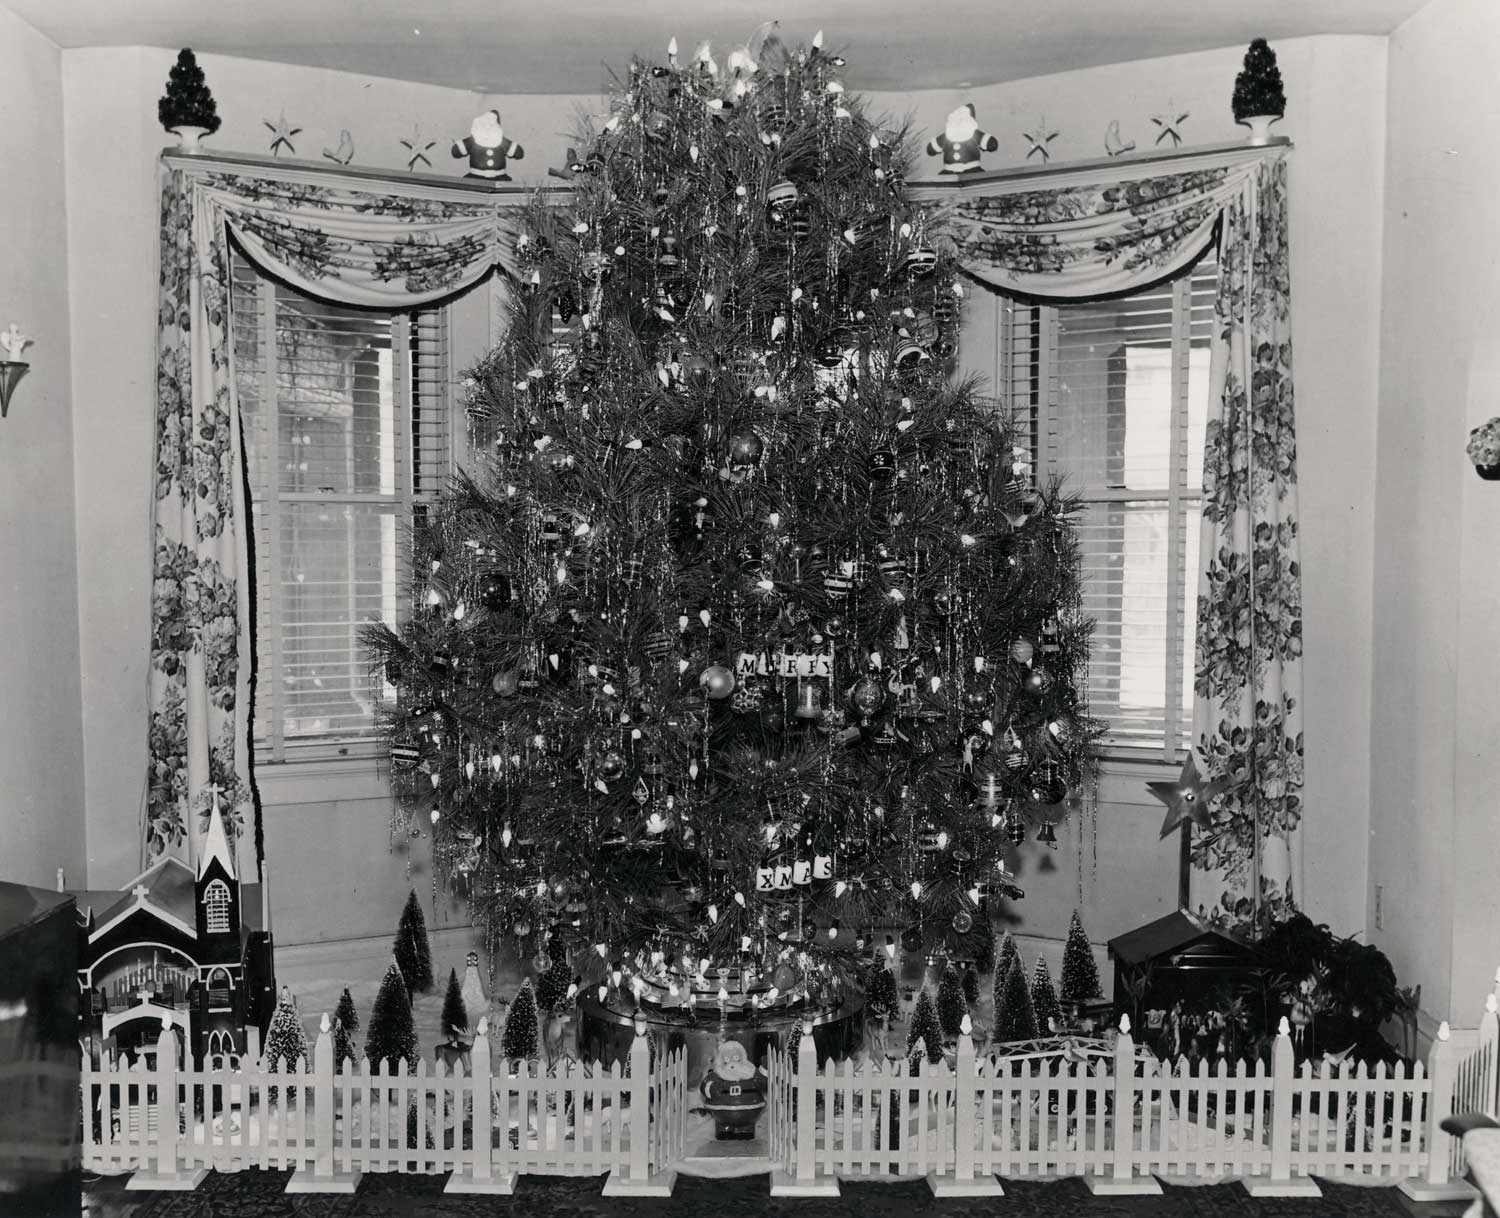 This is my Grandfather's Christmas tree mounted in his homemade rotating stand. The photo was taken in Gary Indiana about 1950. There are slip rings in the base which allow 30 combinations of lighting on the tree as it turns. I inherited the base and still use it every year with a real tree. View full size.